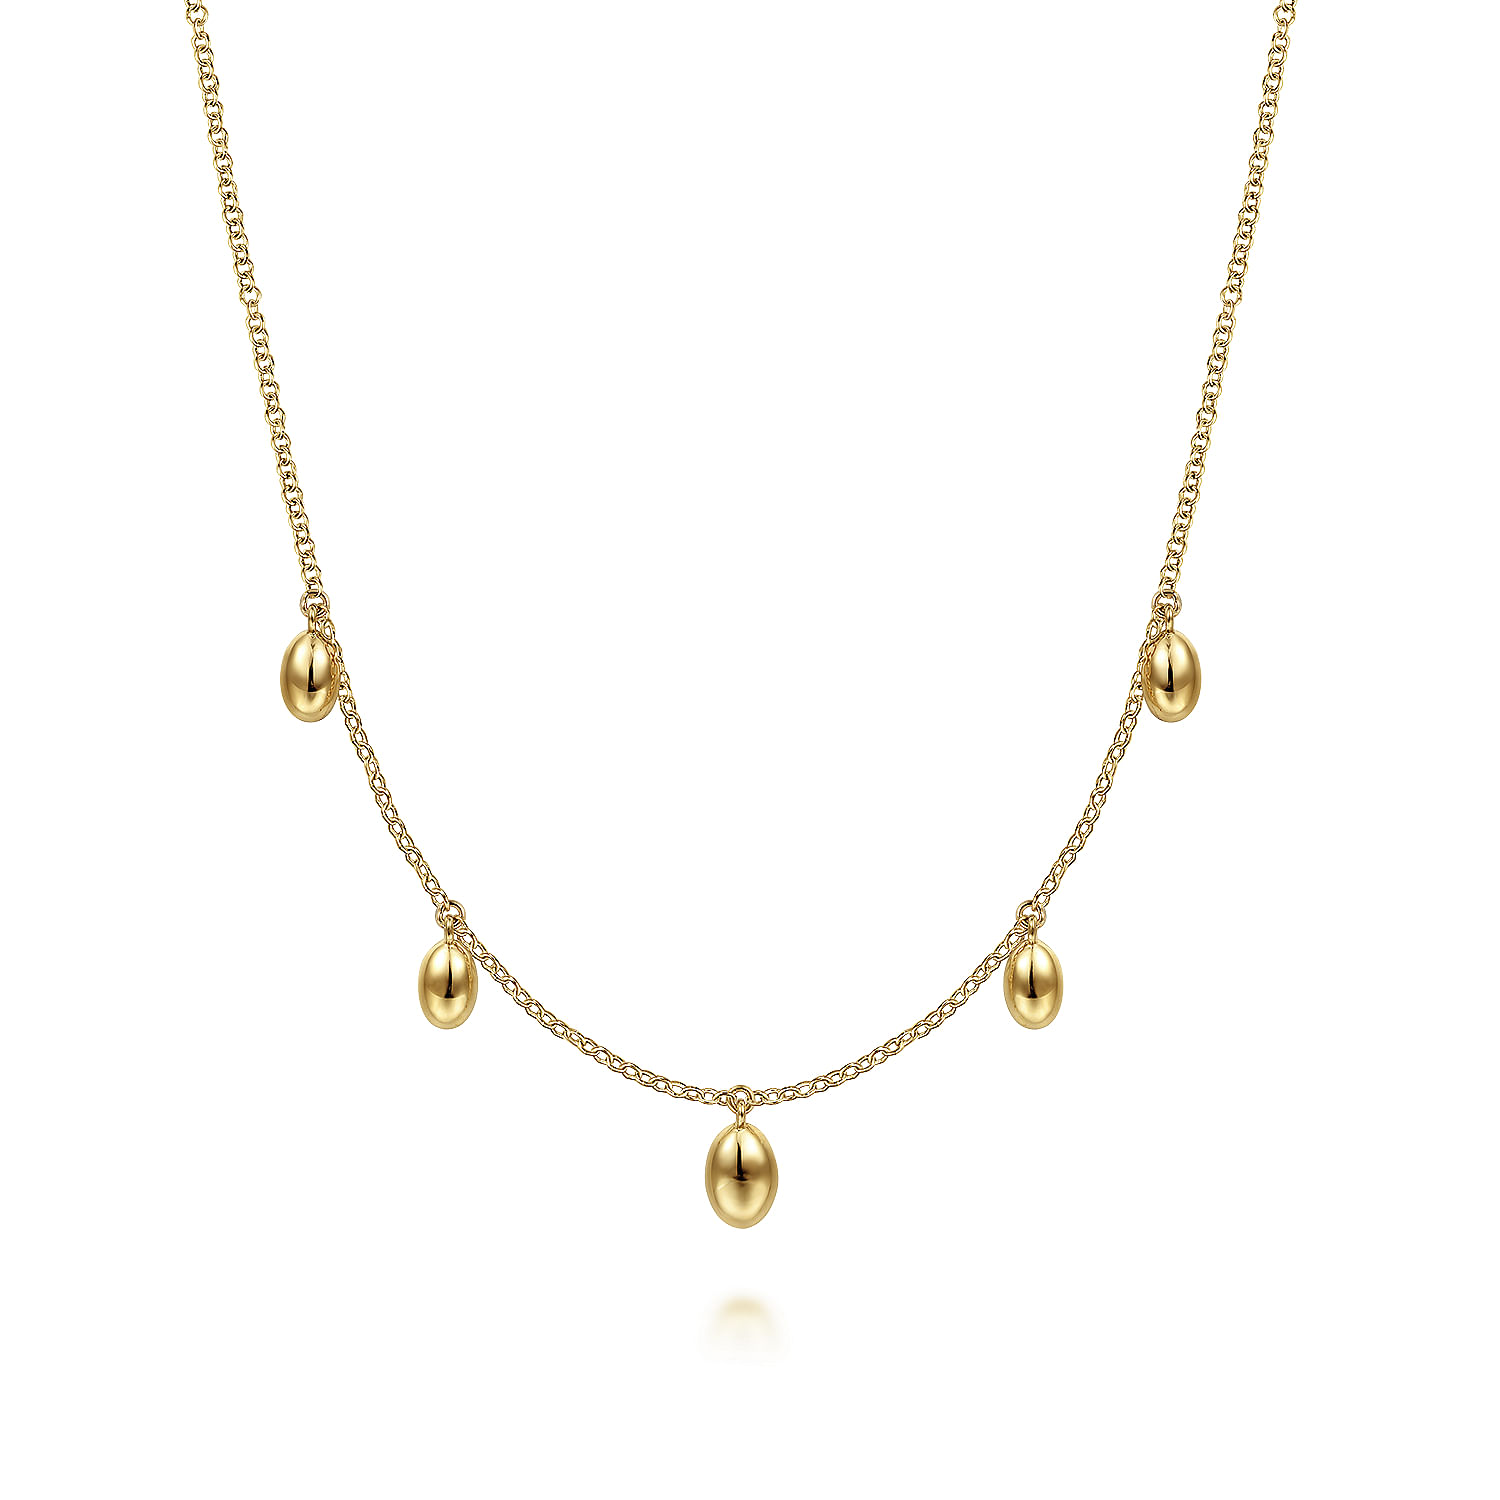 14K Yellow Gold Chain Necklace with Bujukan Bead Drops